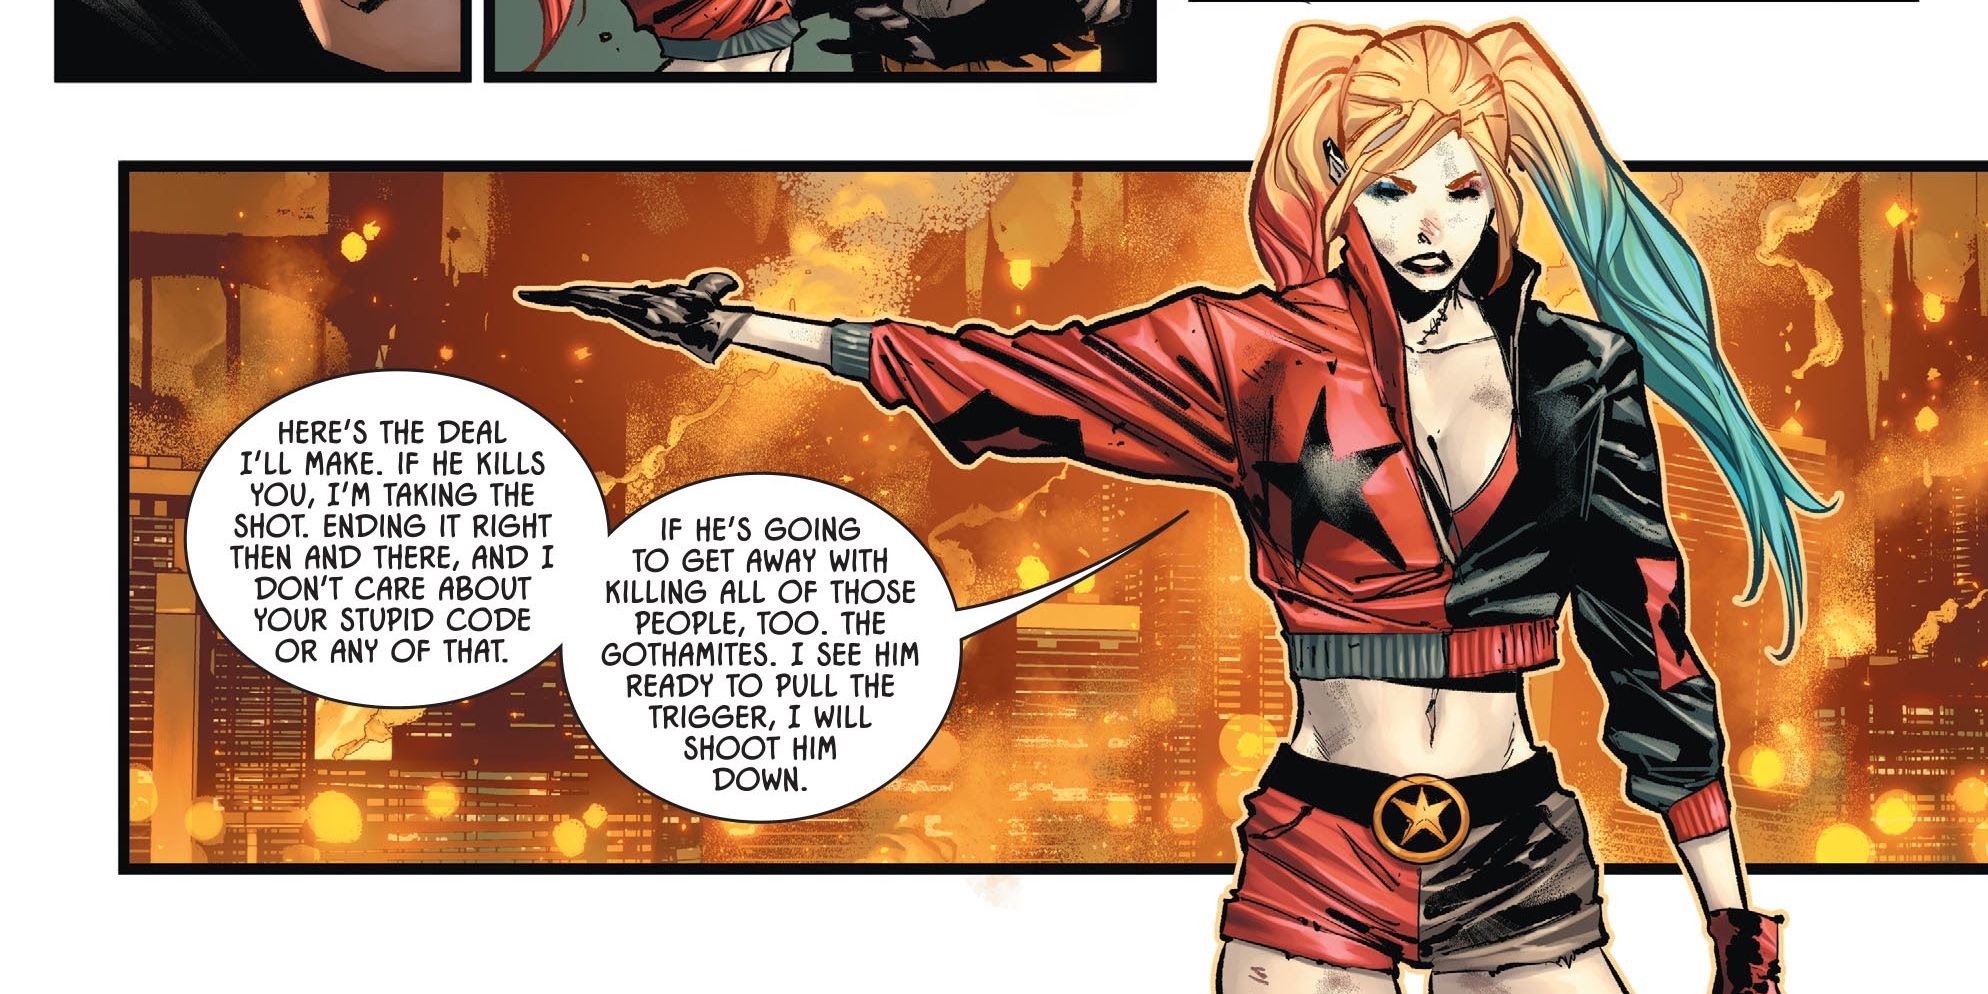 Harley Quinn is Actually Going To Kill Joker in DC Comics